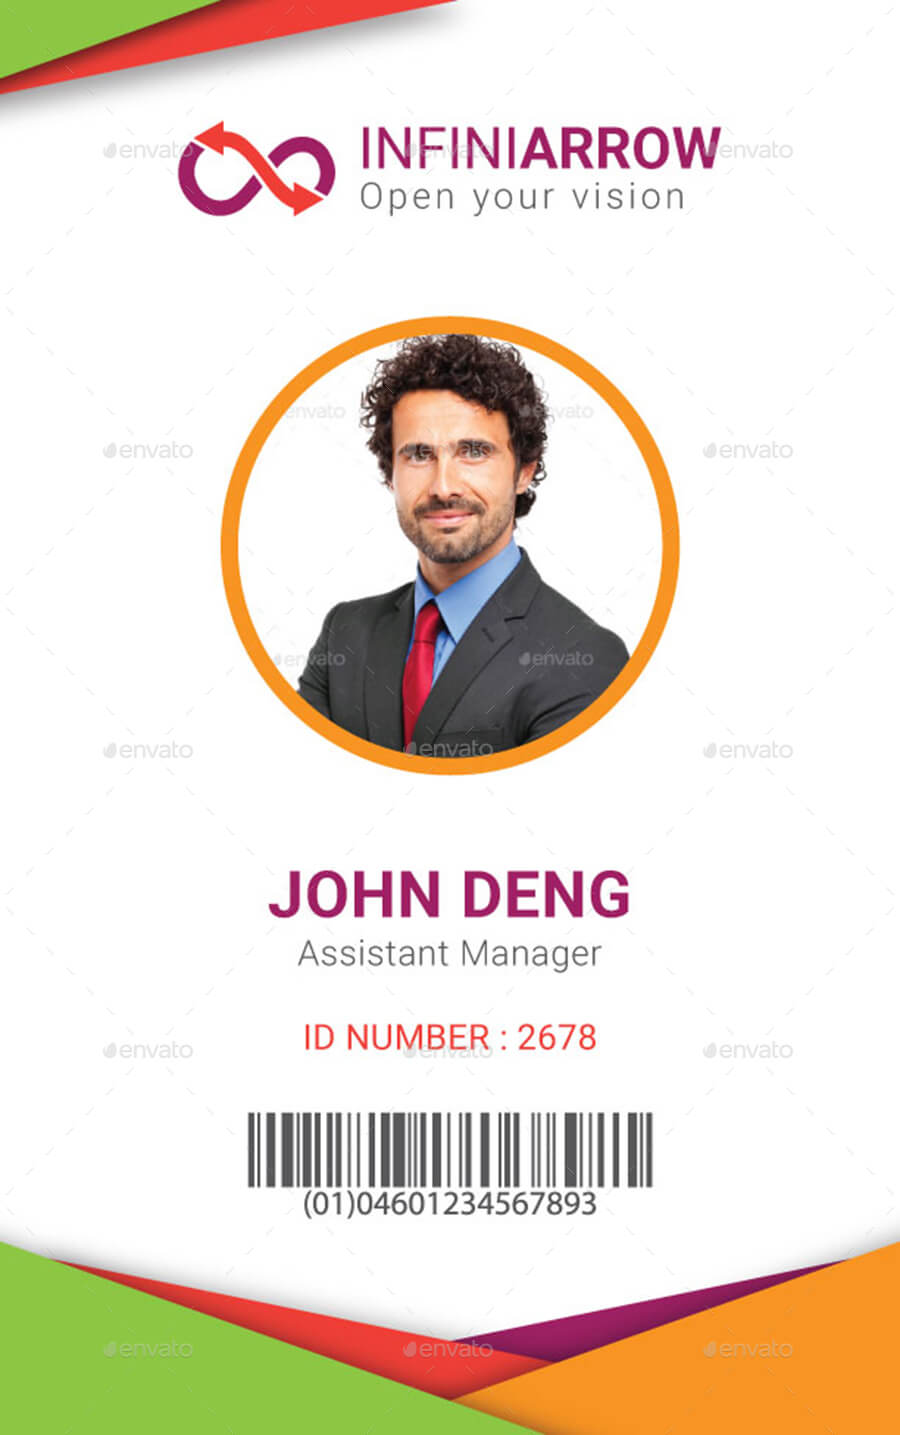 021 06 Image Template Ideas Employee Id Card Psd File Free For Media Id Card Templates